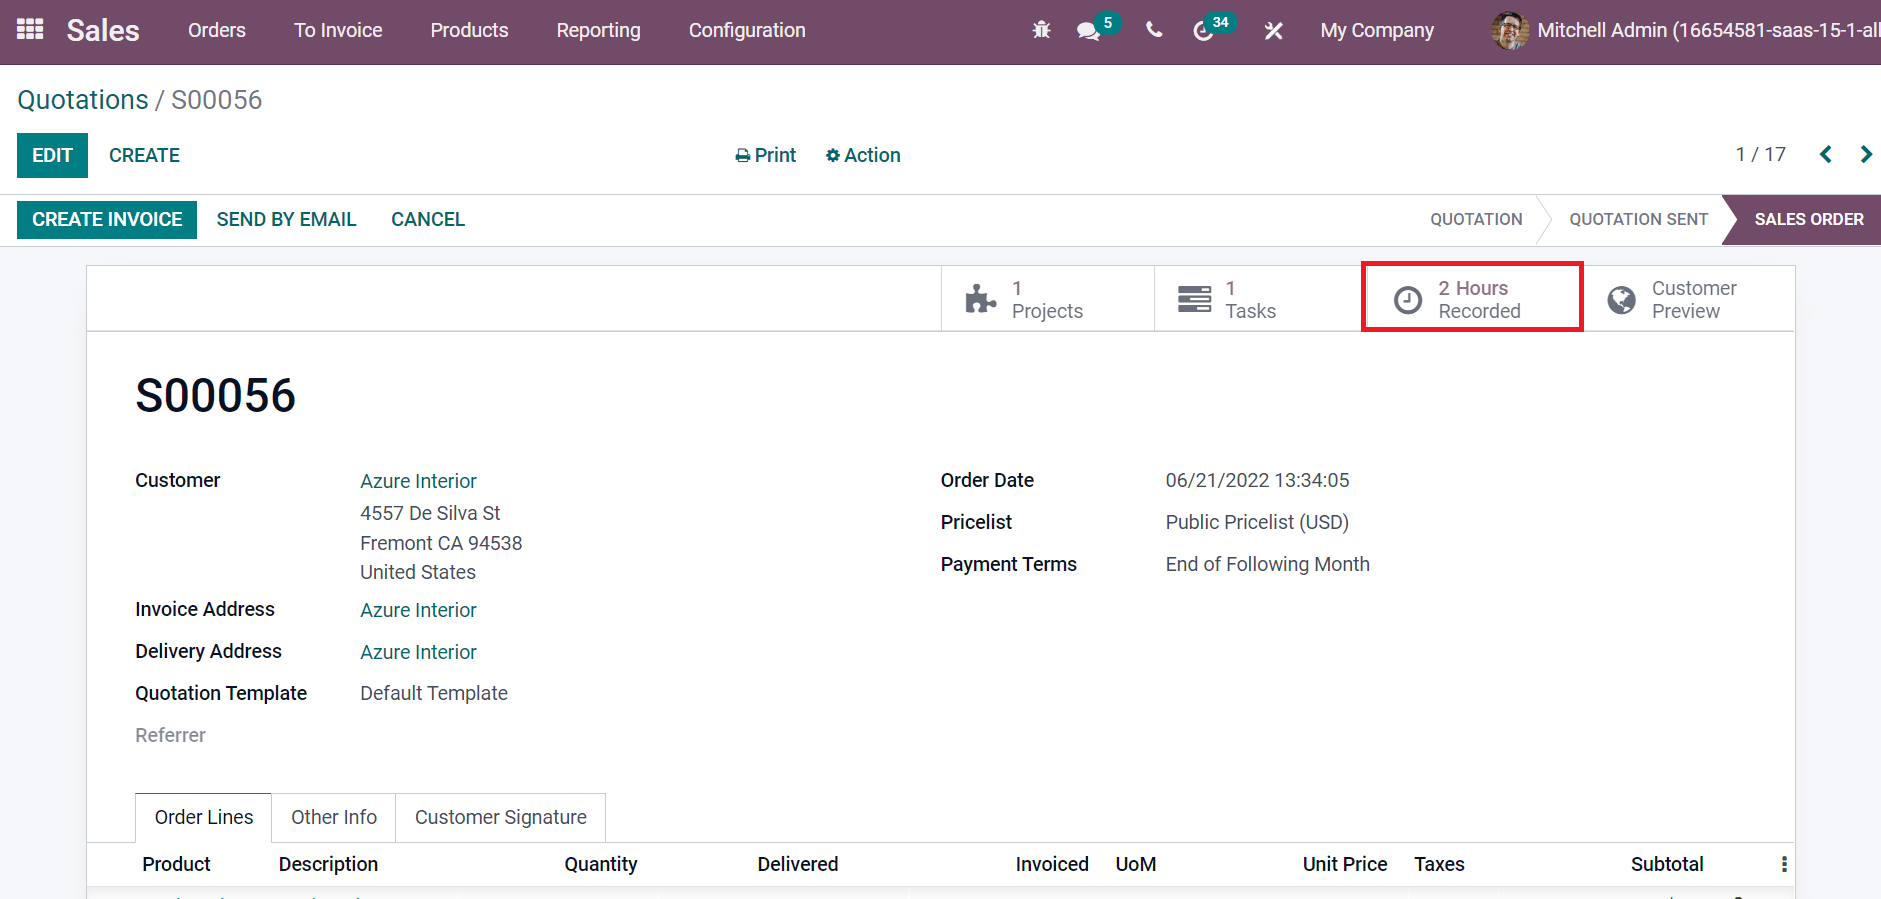 how-to-create-task-from-sale-order-in-odoo-15-sales-module-cybrosys